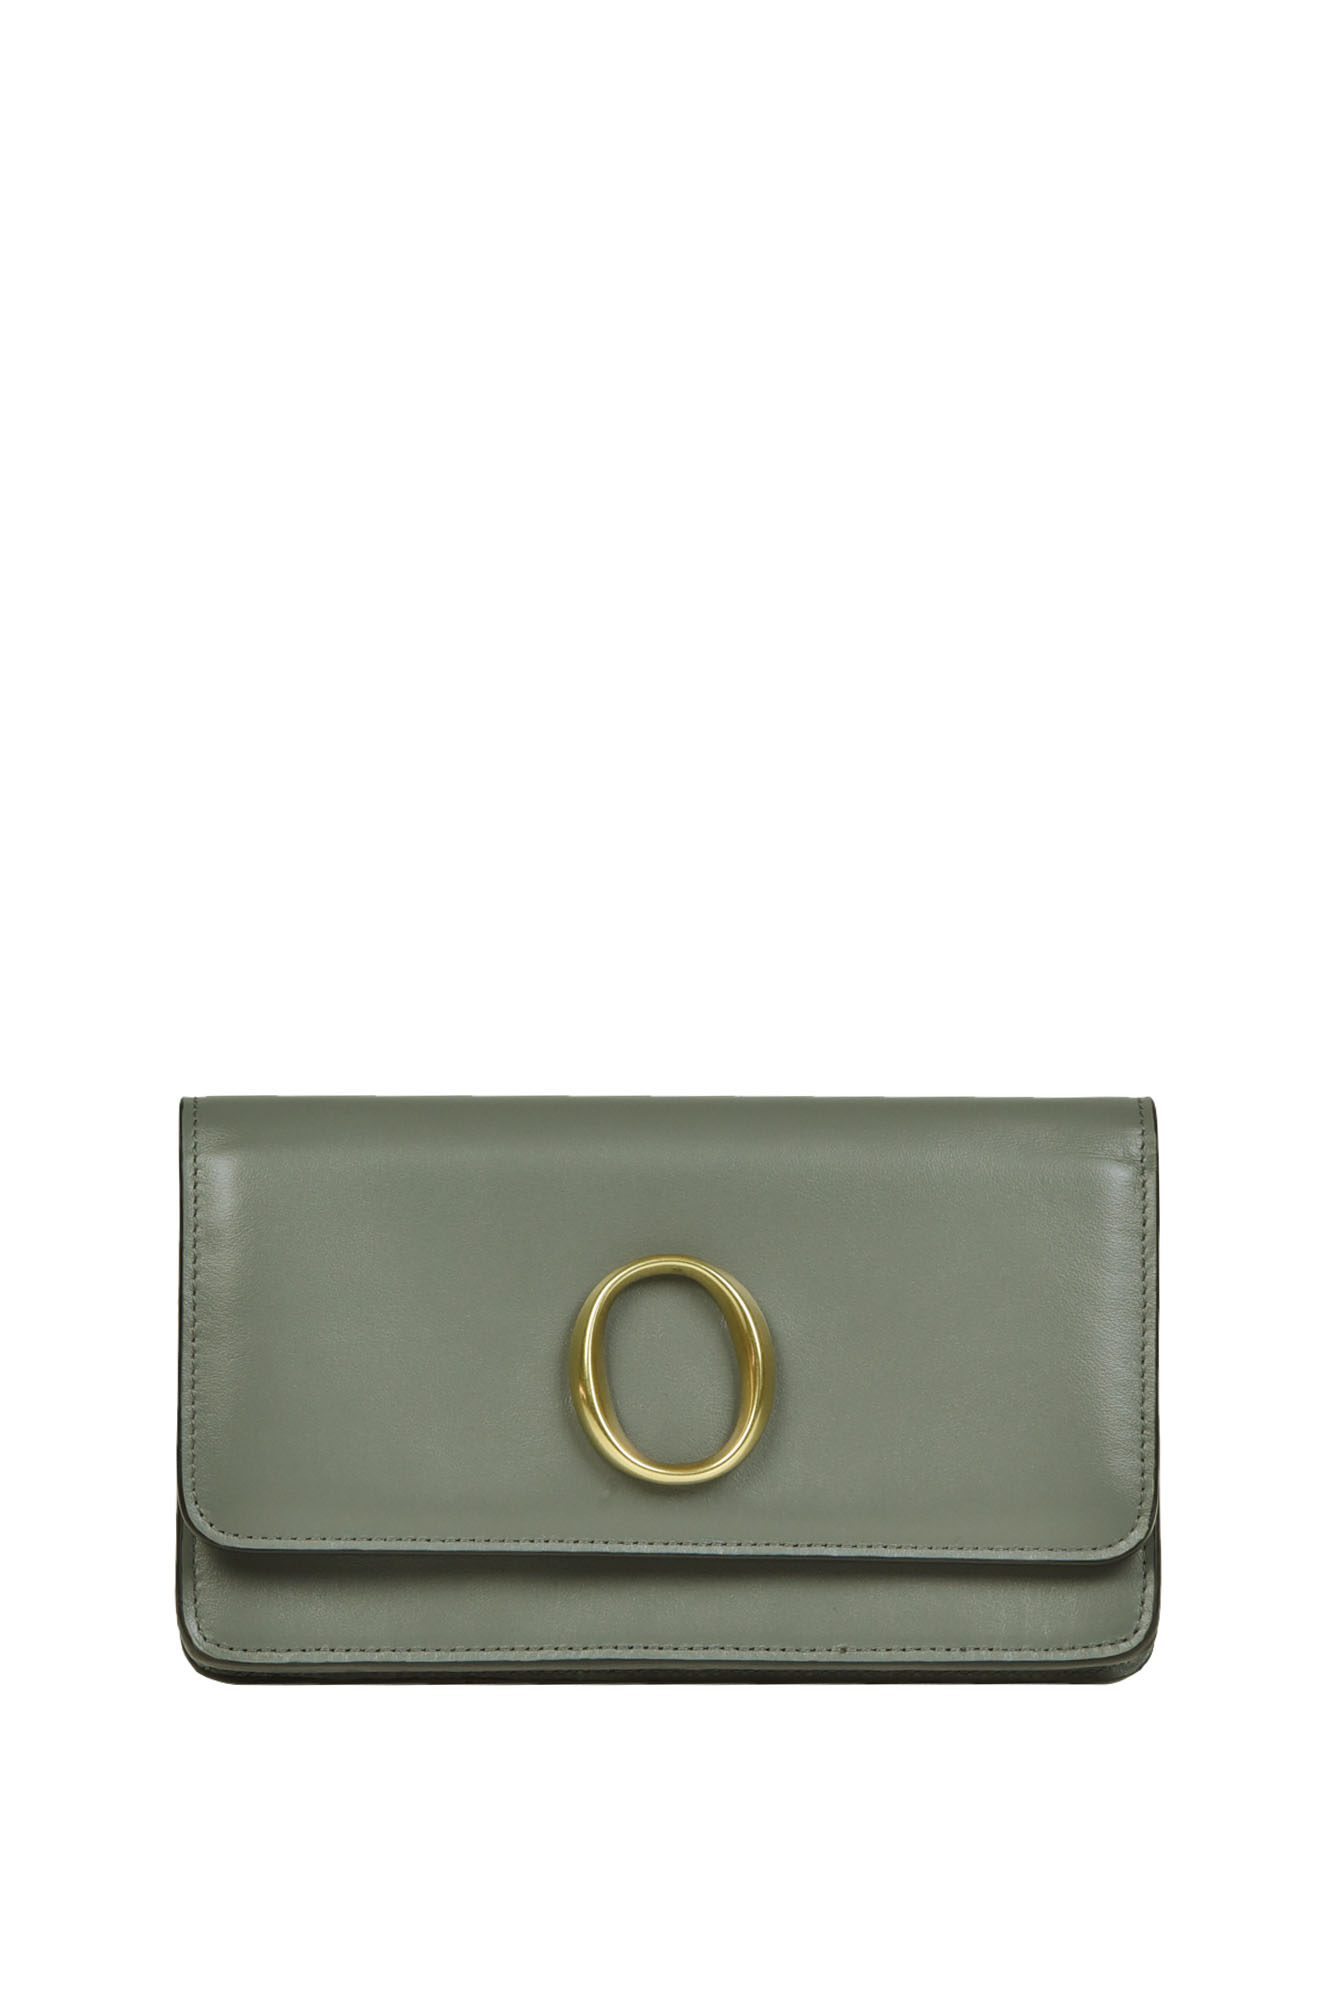 Orciani Leather Wallet With Detachable Chain In Olive Green